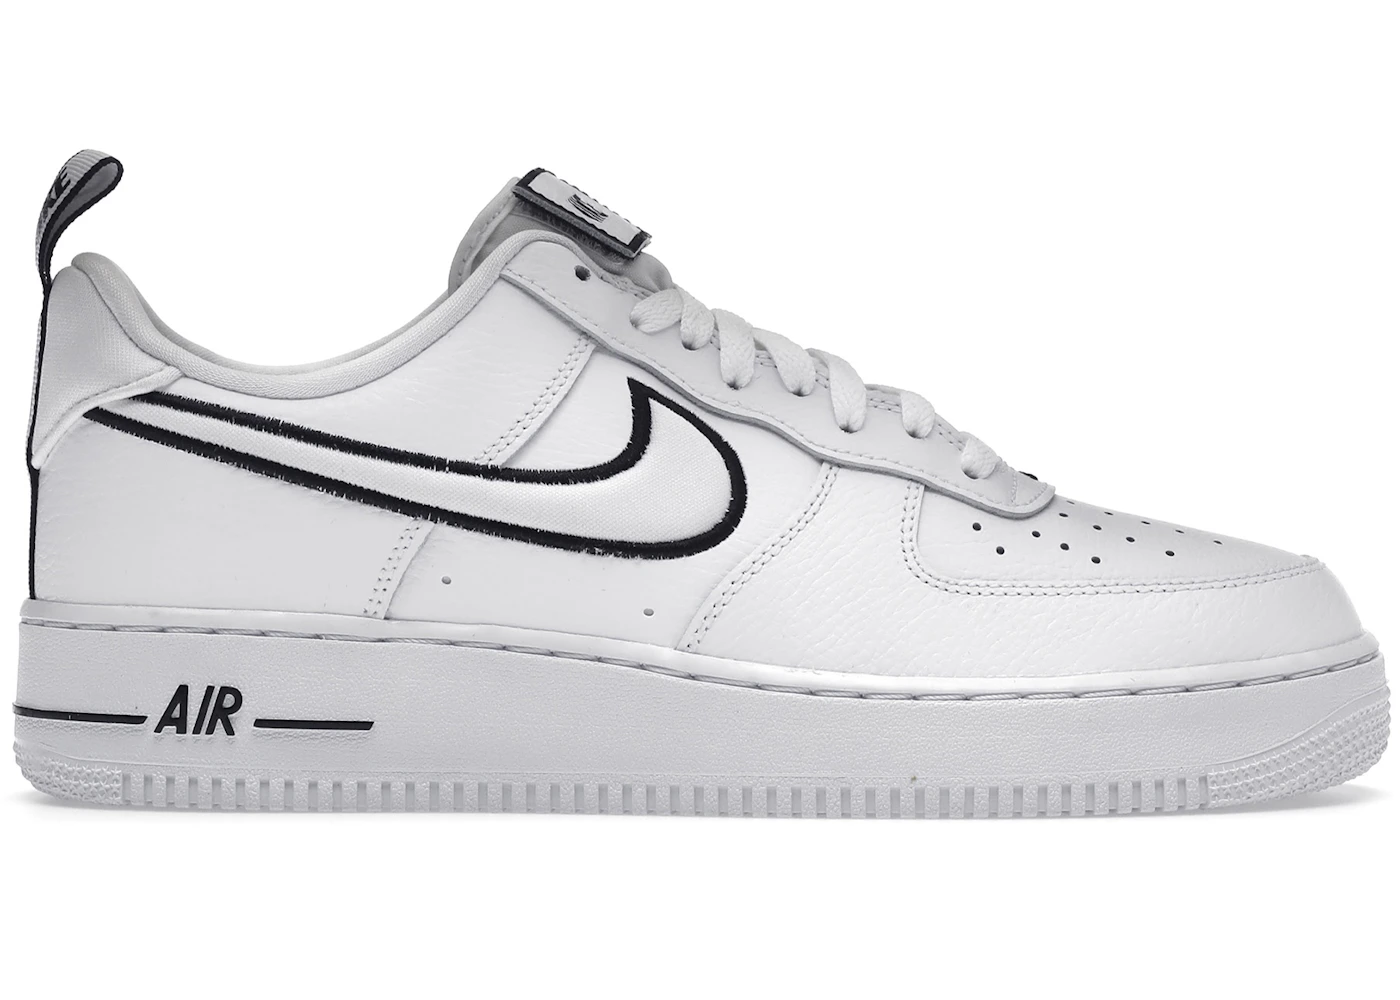 Air Force One White Black Swoosh | escapeauthority.com